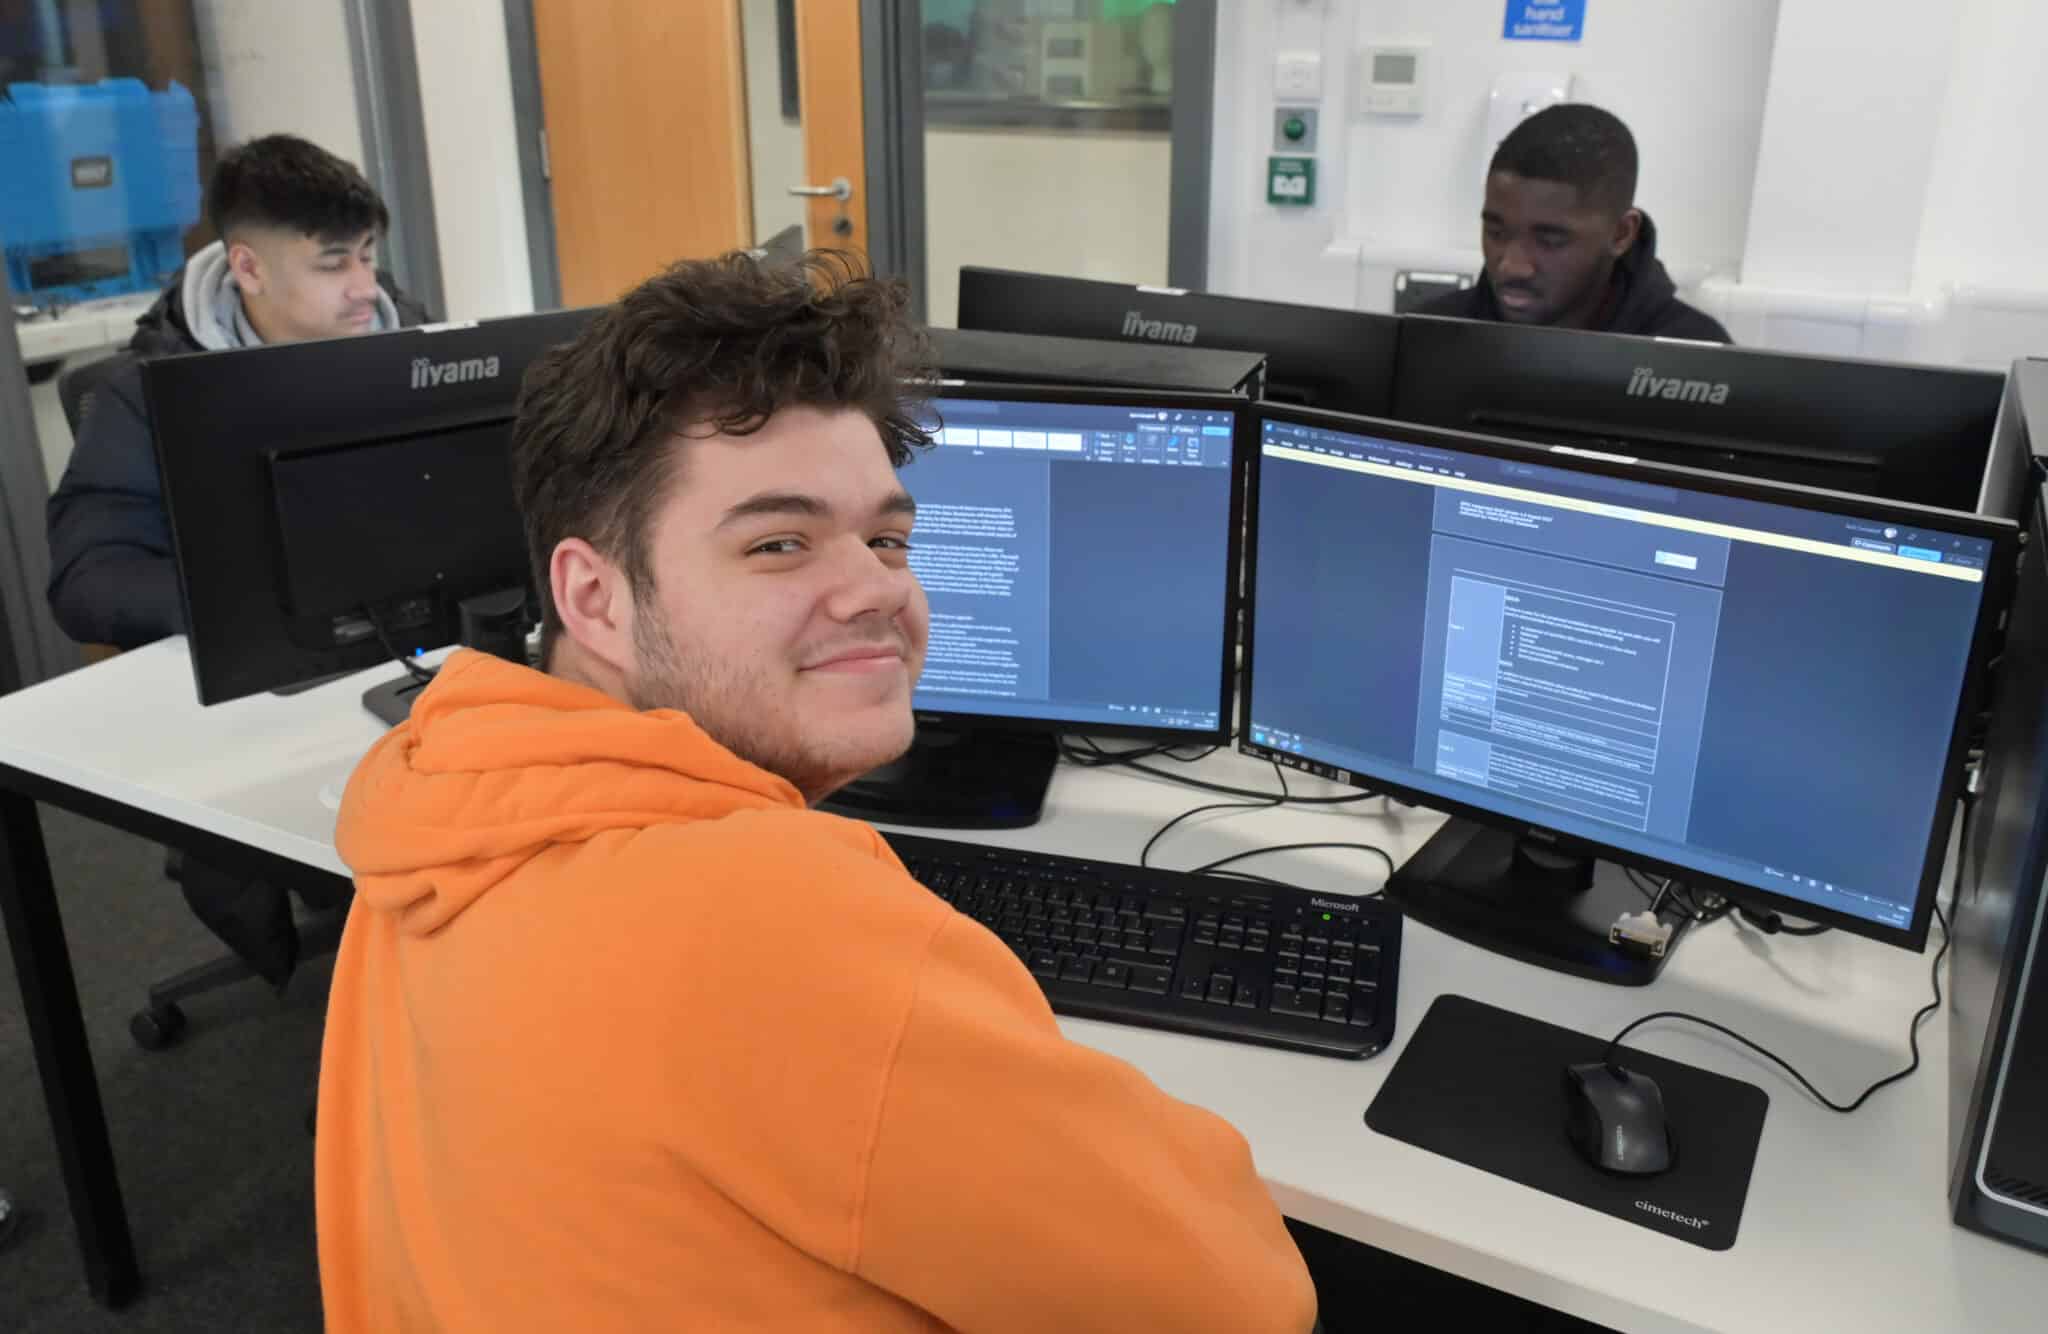 Students working in the computing centre